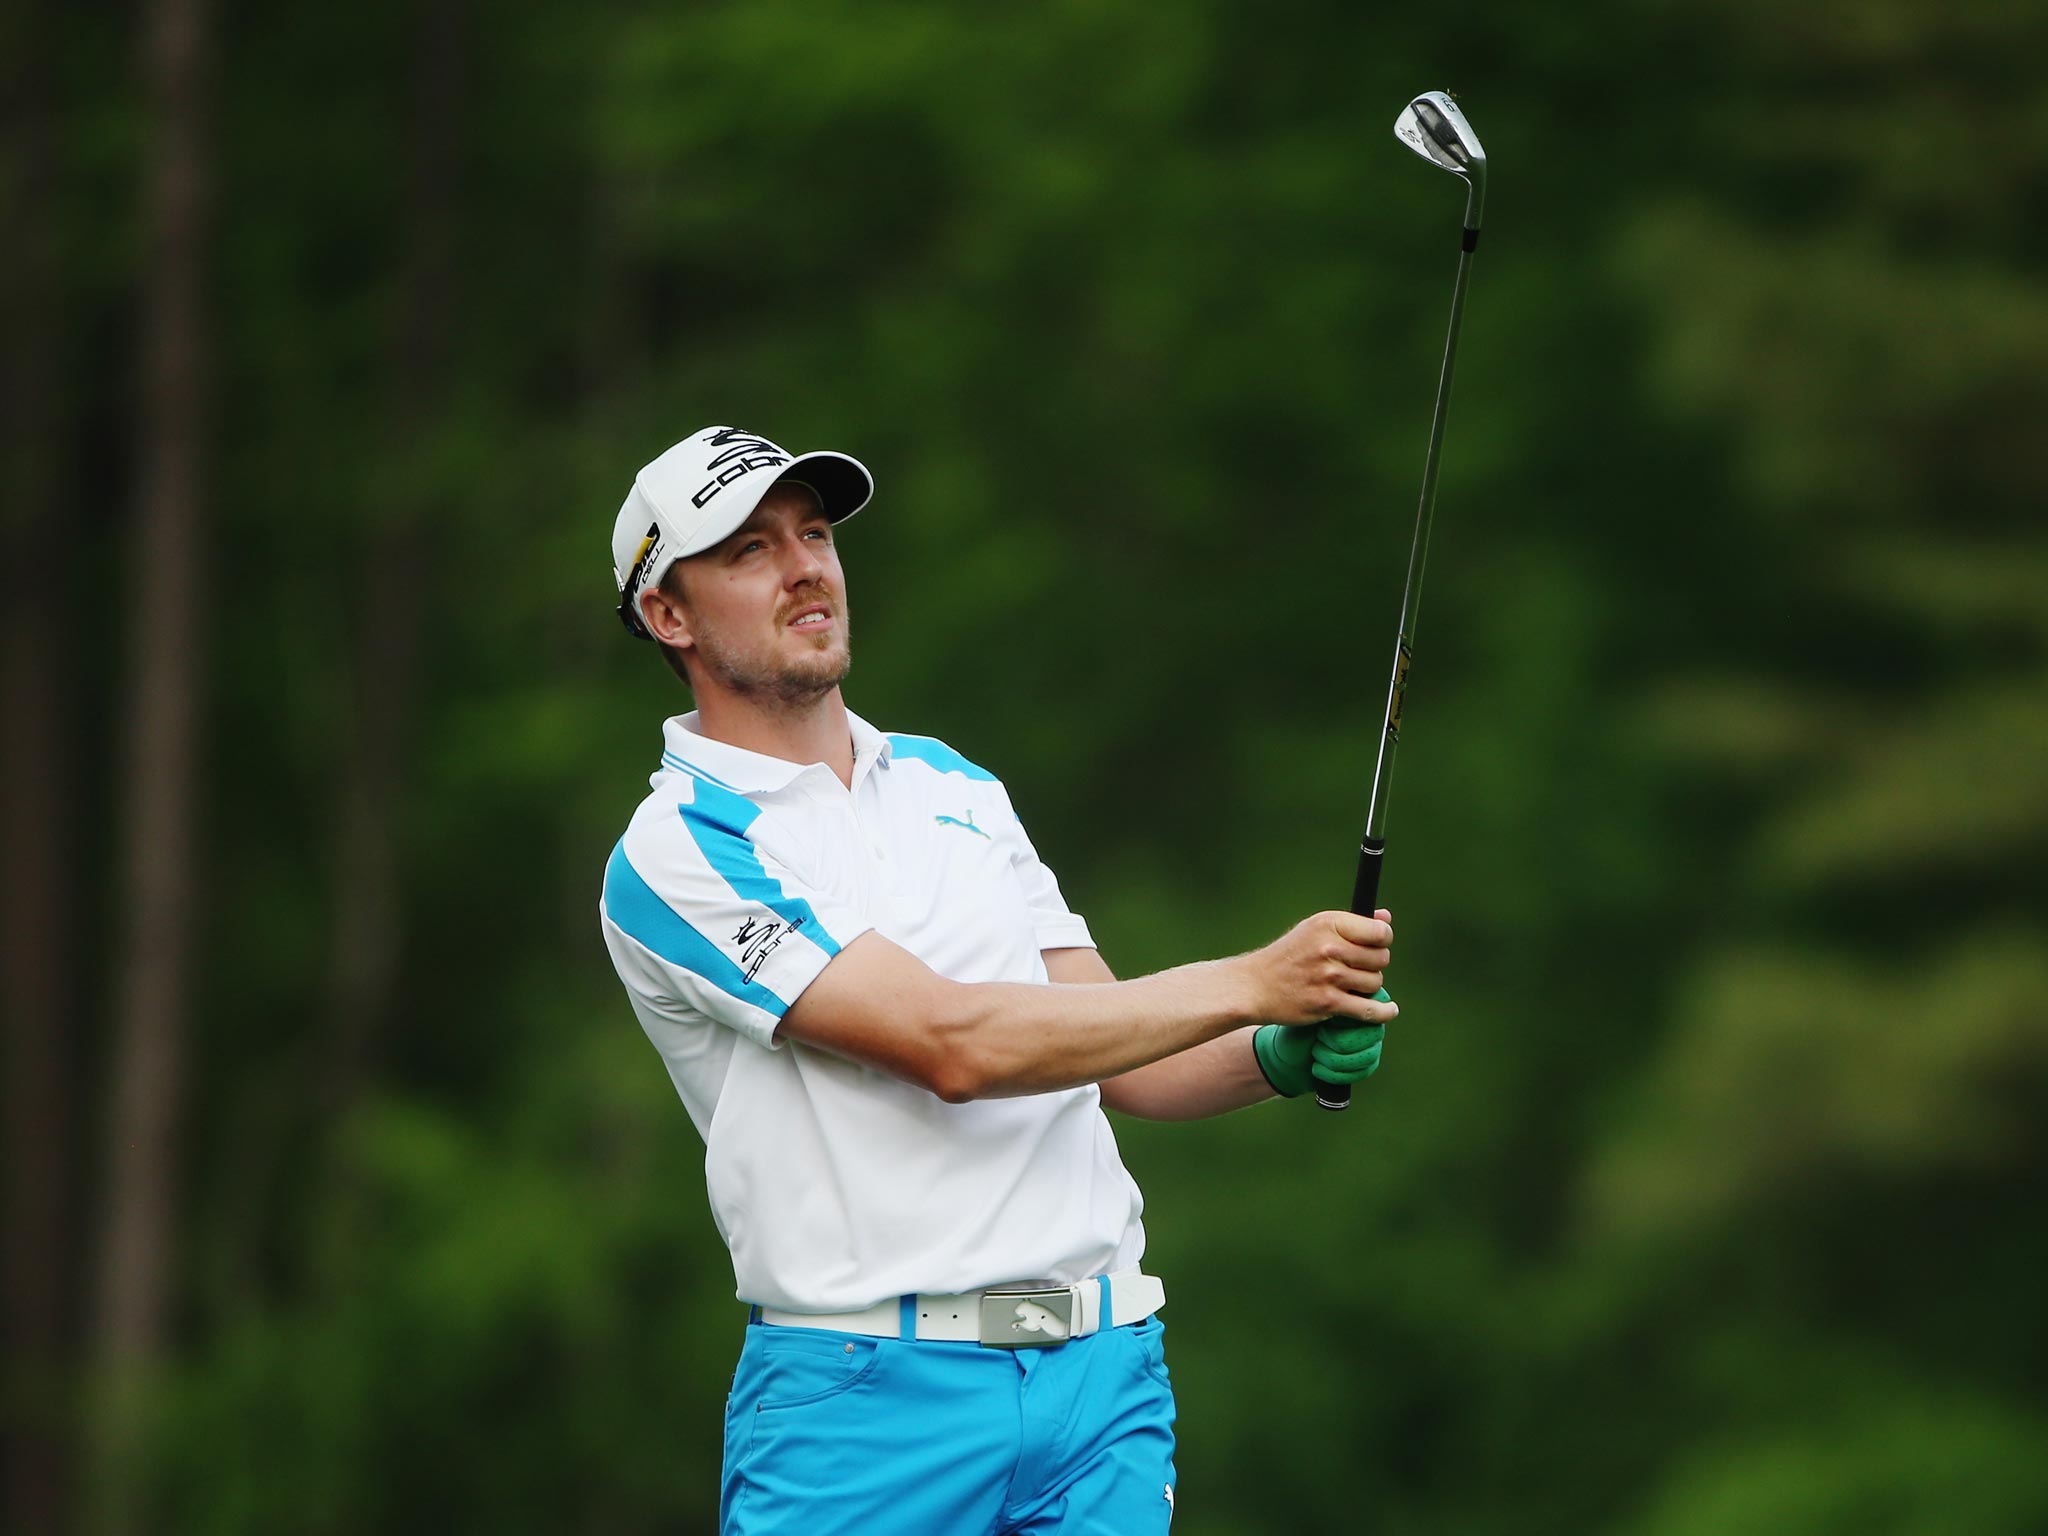 Jonas Blixt of Sweden watches his tee shot on the 12th hole during the final round